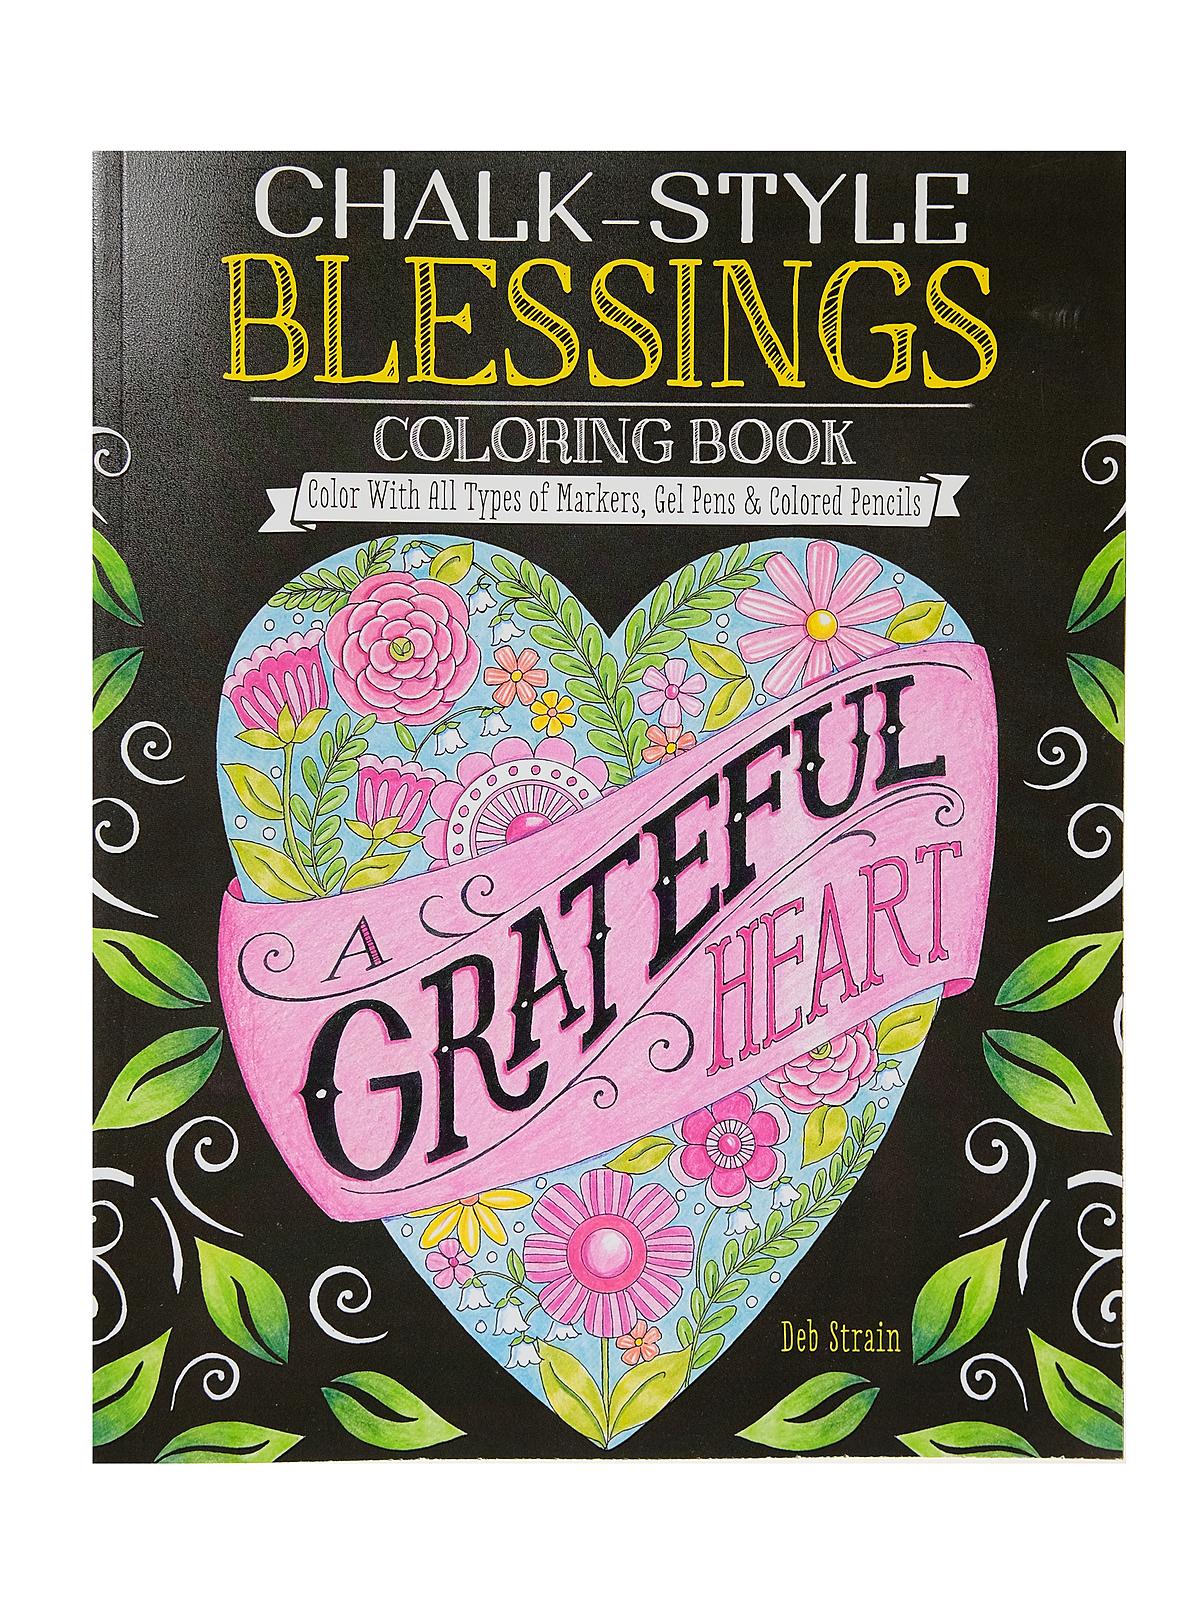 Chalk-style Coloring Blessings